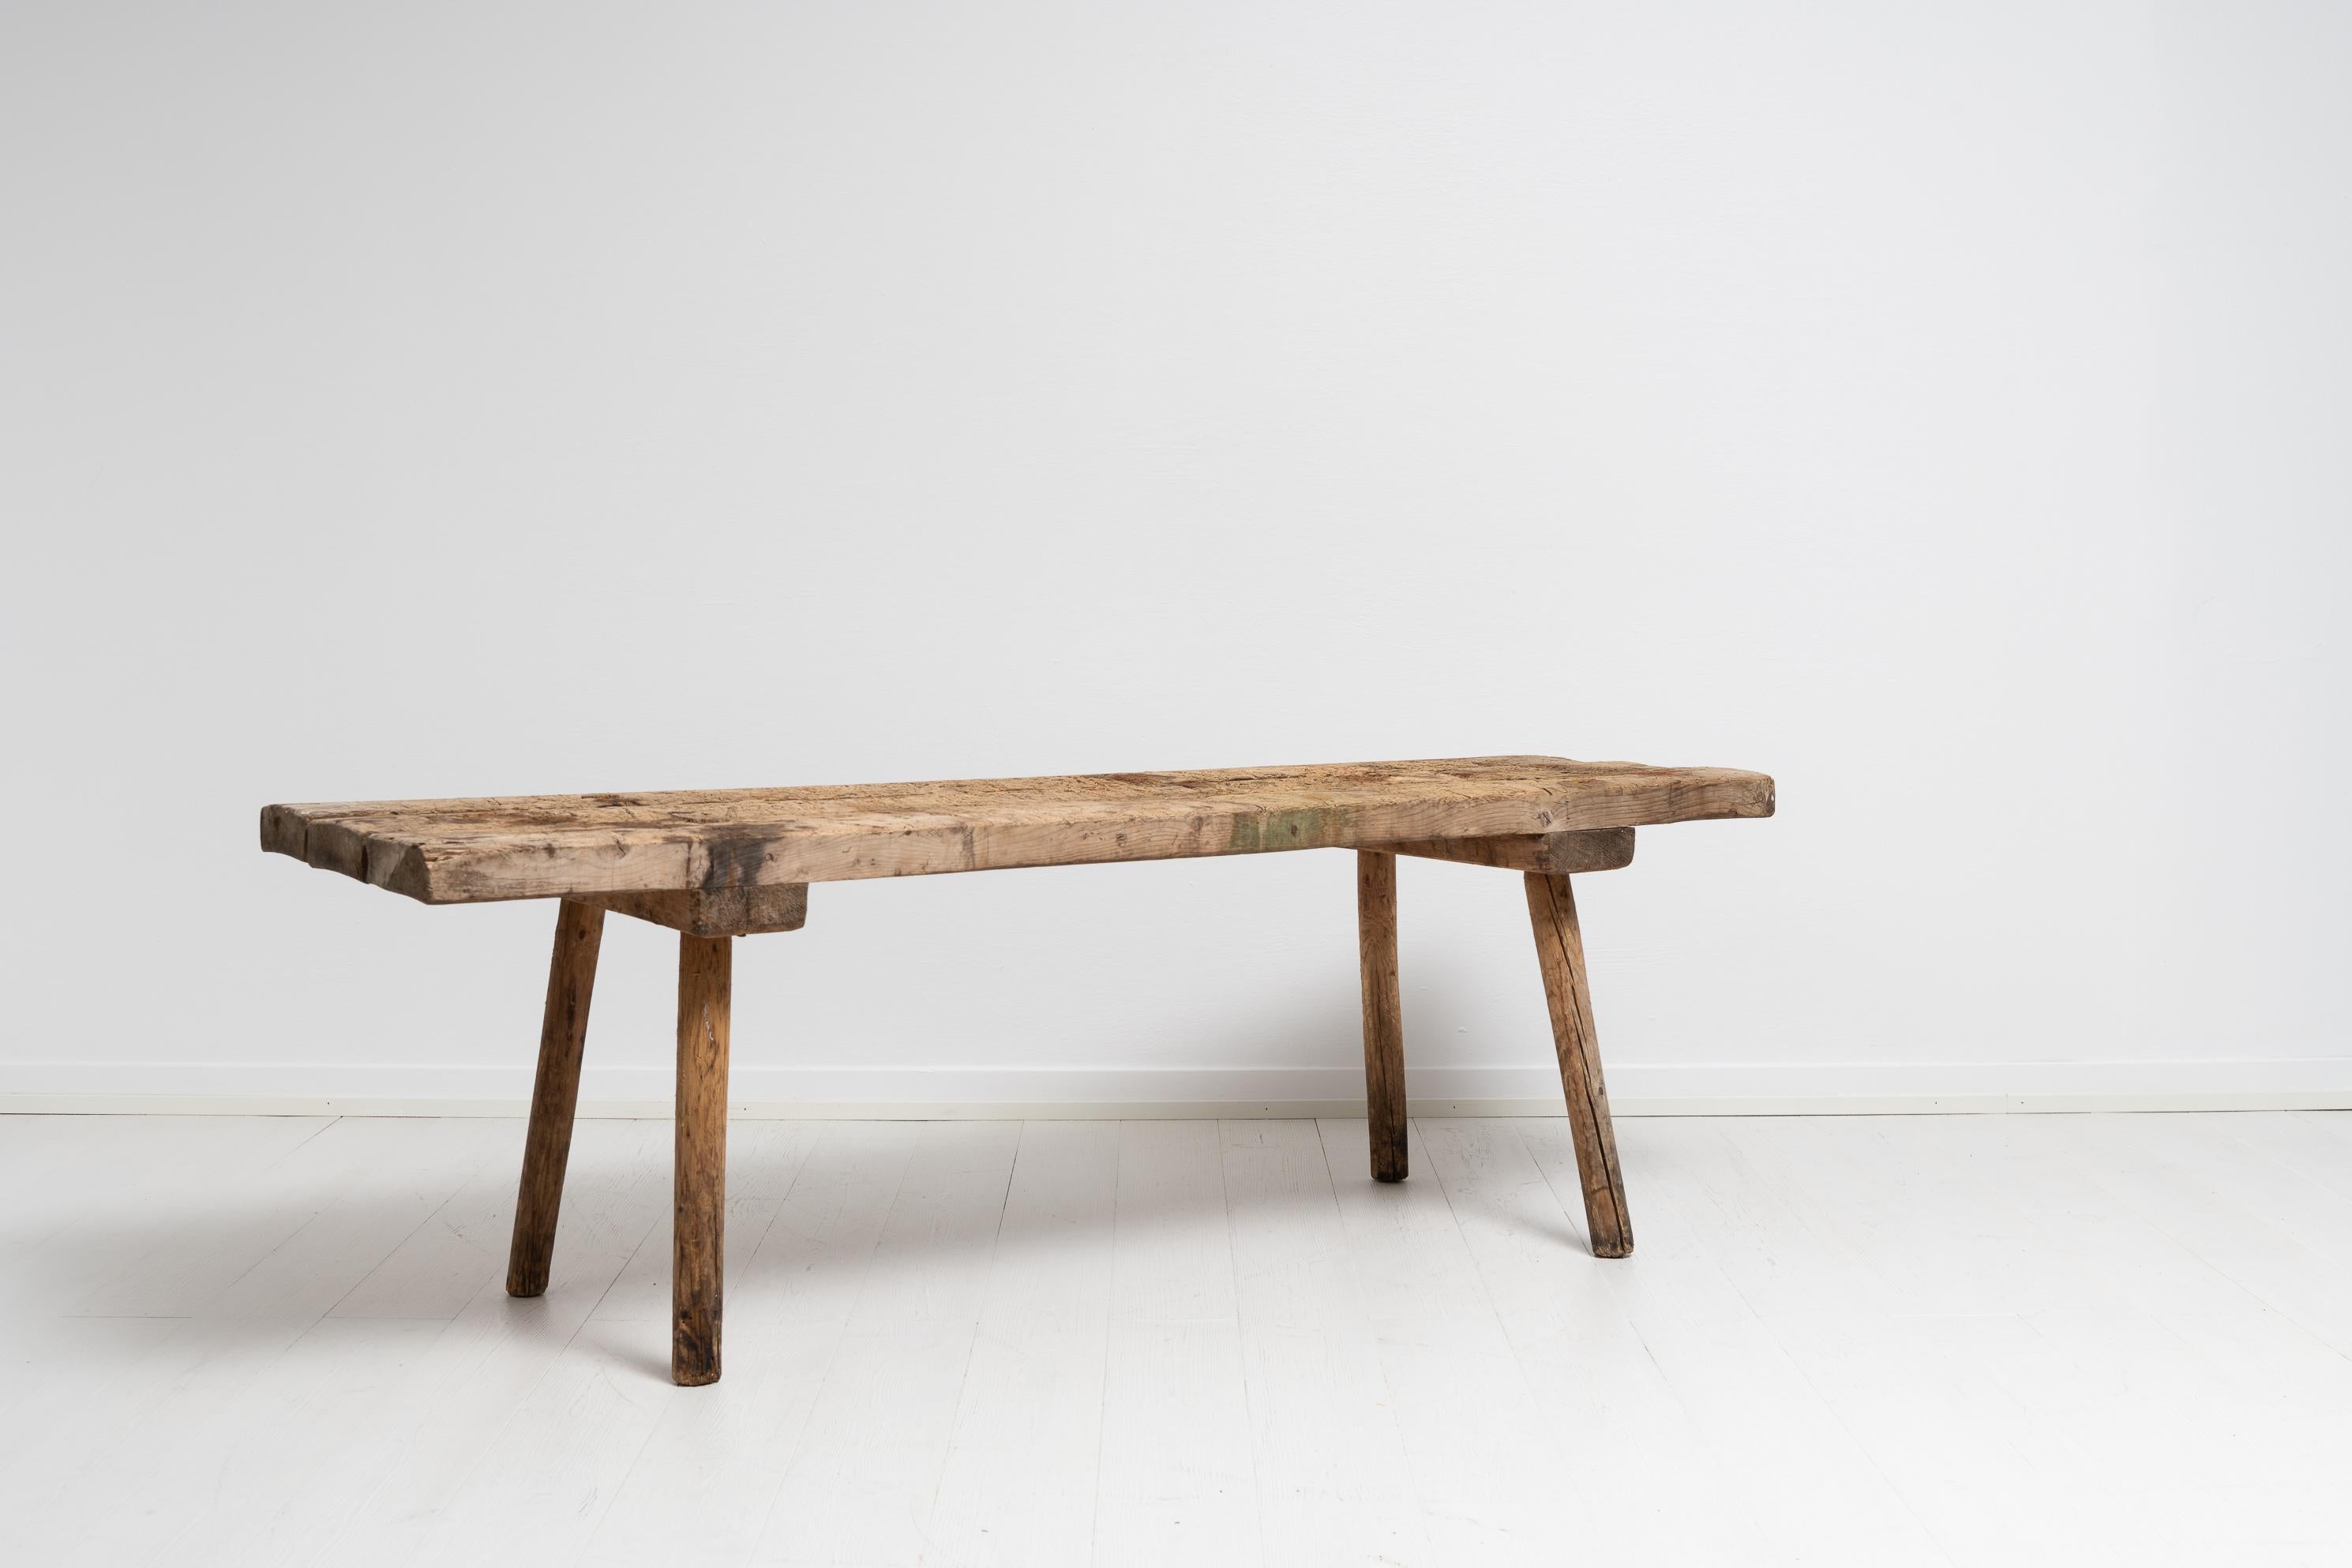 Early 19th Century Swedish Folk Art Rustic Work Bench Coffee Table In Good Condition For Sale In Kramfors, SE